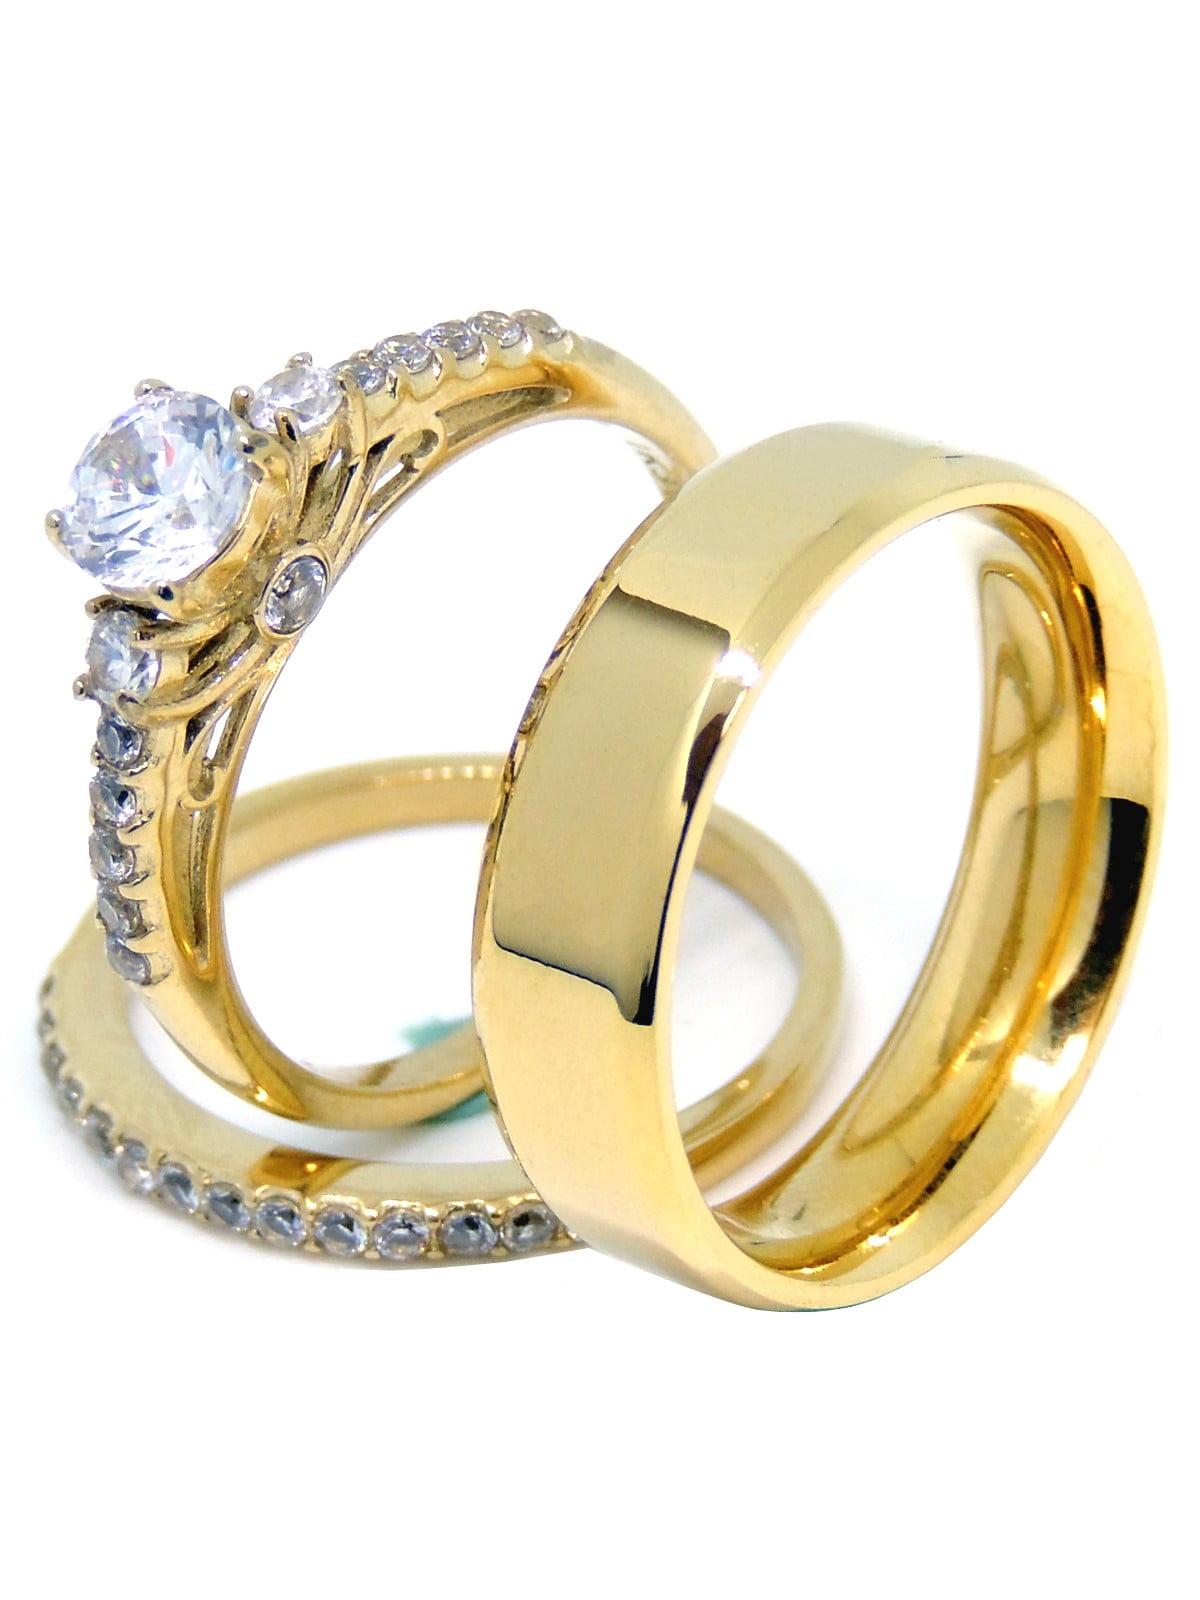 HIS HERS 3 PIECE MEN'S WOMEN'S 14K GOLD PLATED WEDDING ENGAGEMENT RING BAND SET 